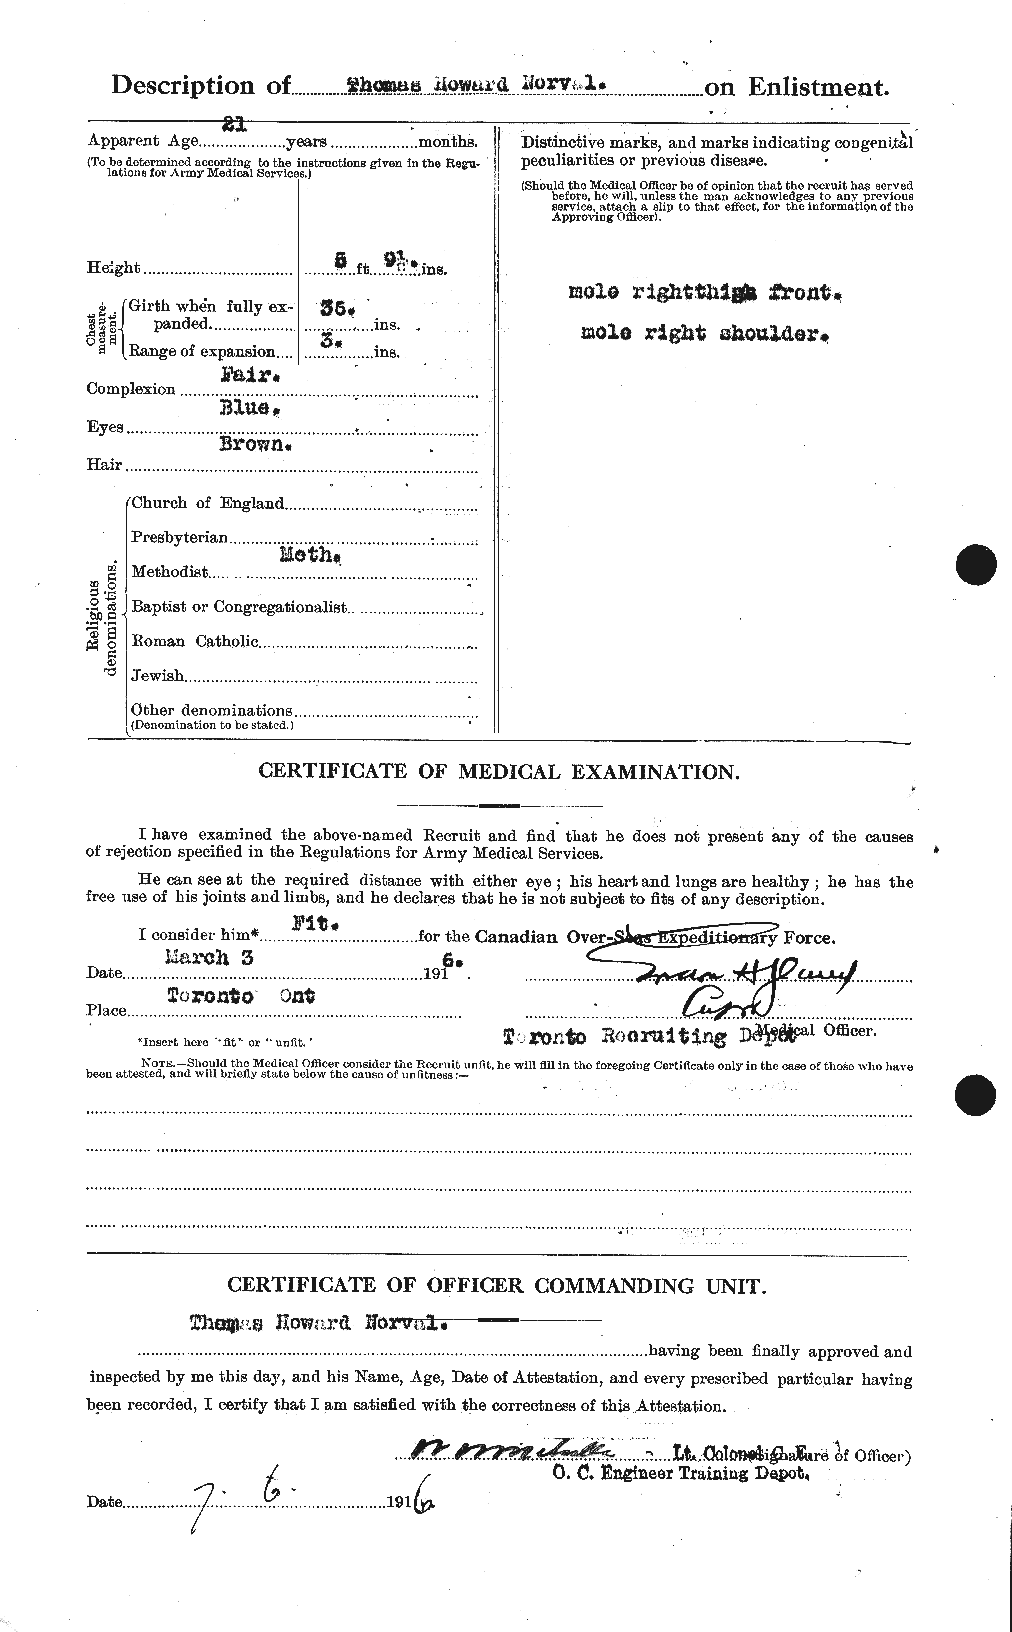 Personnel Records of the First World War - CEF 551894b